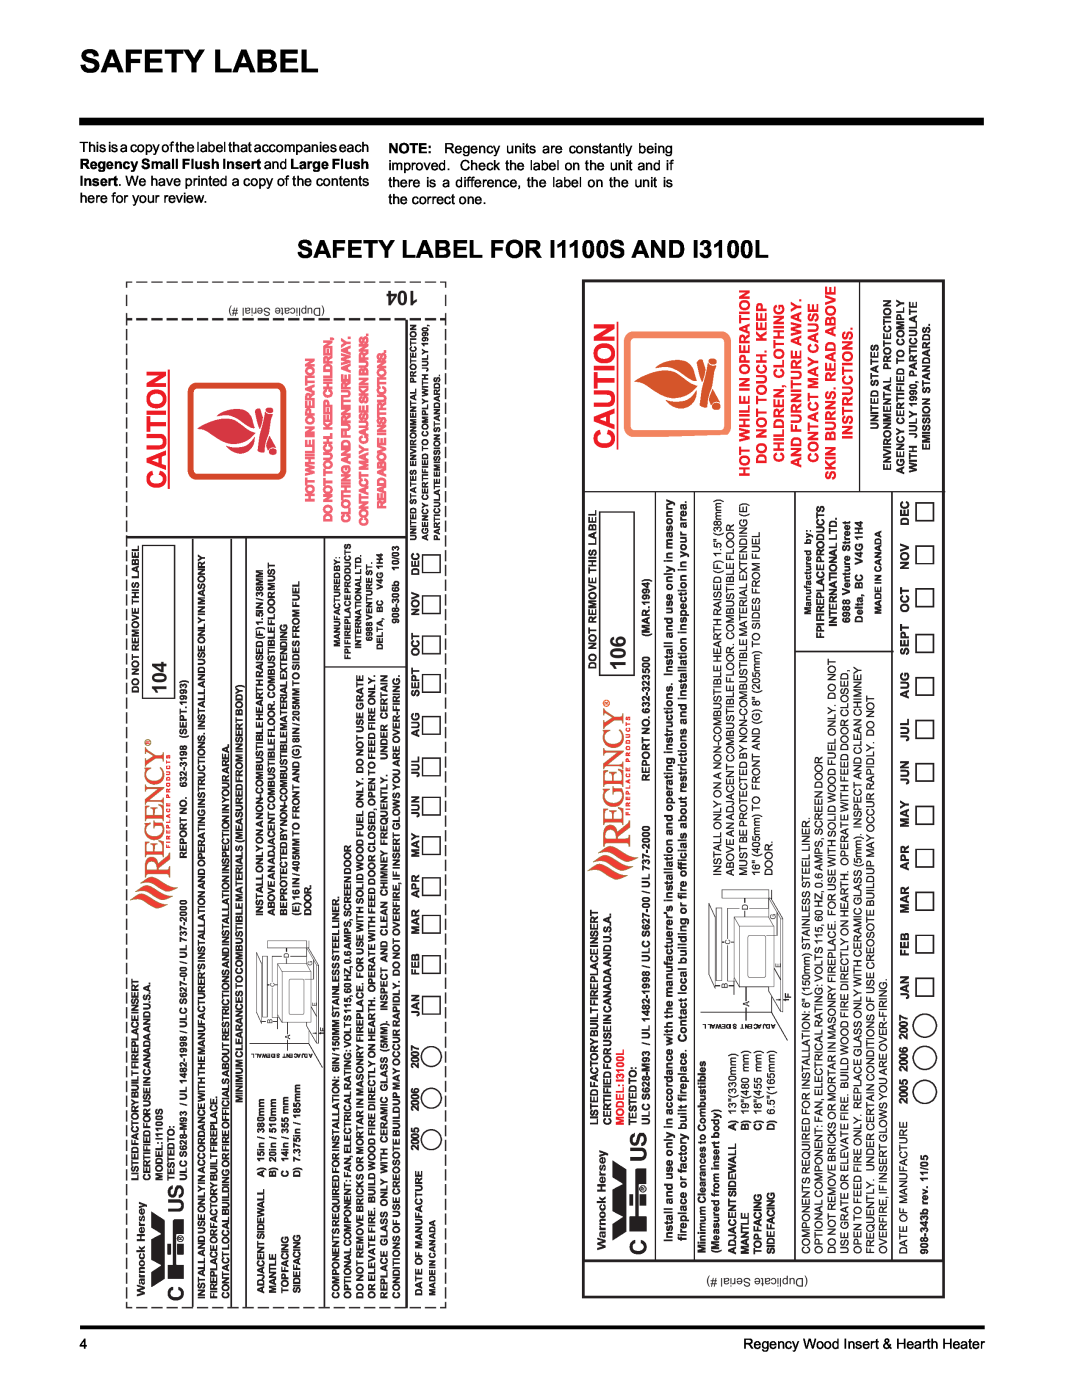 Regency I3100L Safety Label, SAFETY LABEL FORI1100S, Hot While In Operation, Regency Small Flush Insert and Large Flush 